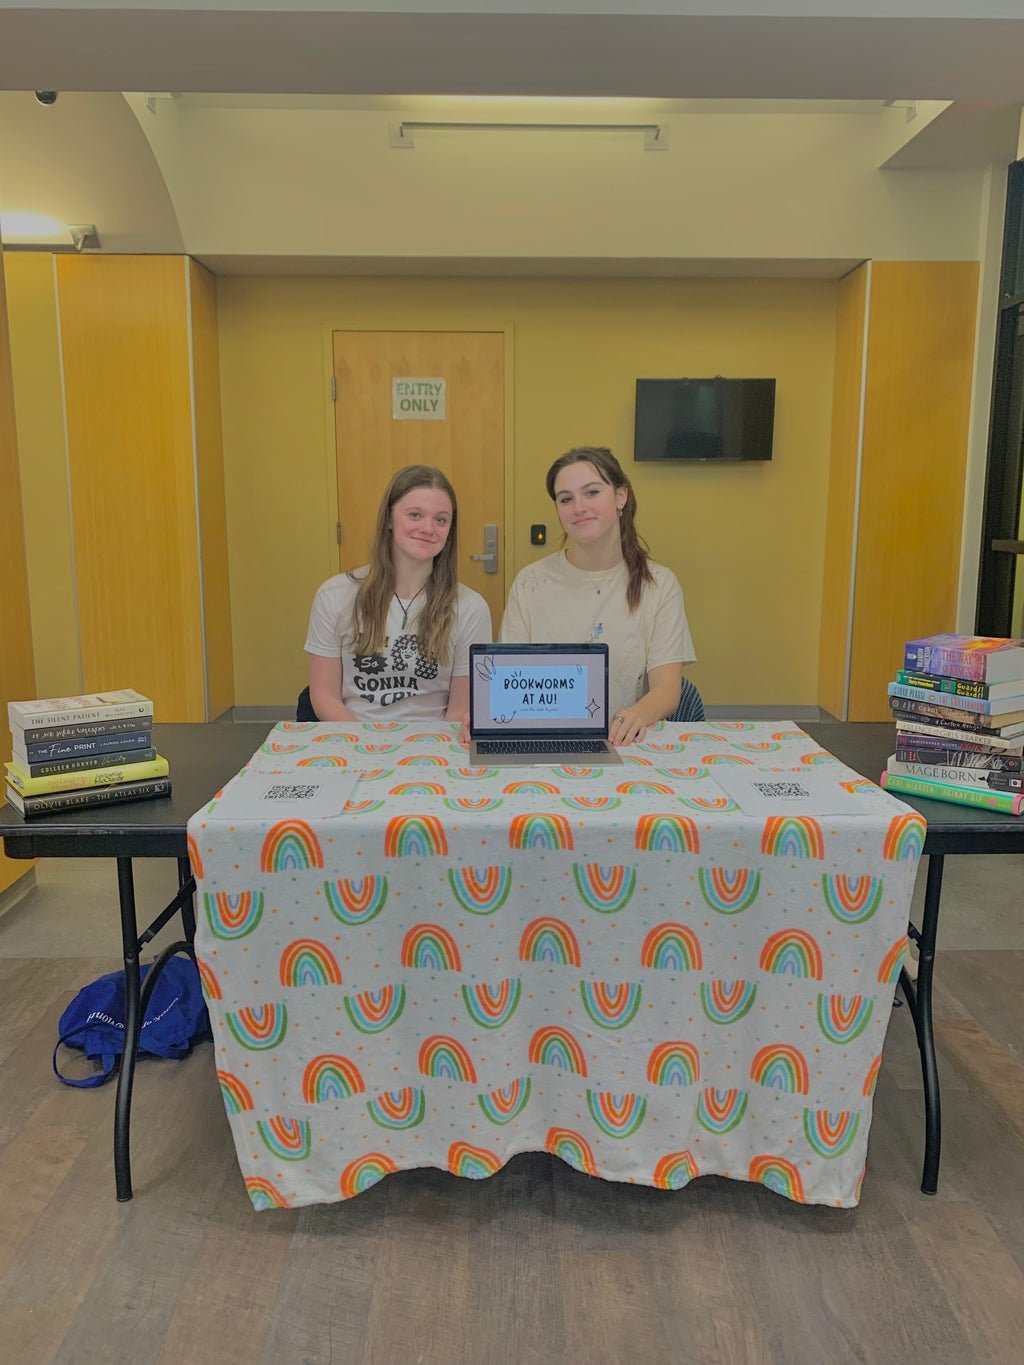 Mallory Horner (Right) and Ella Provins (Left) at Bookworms@ AU\' involvement fair table